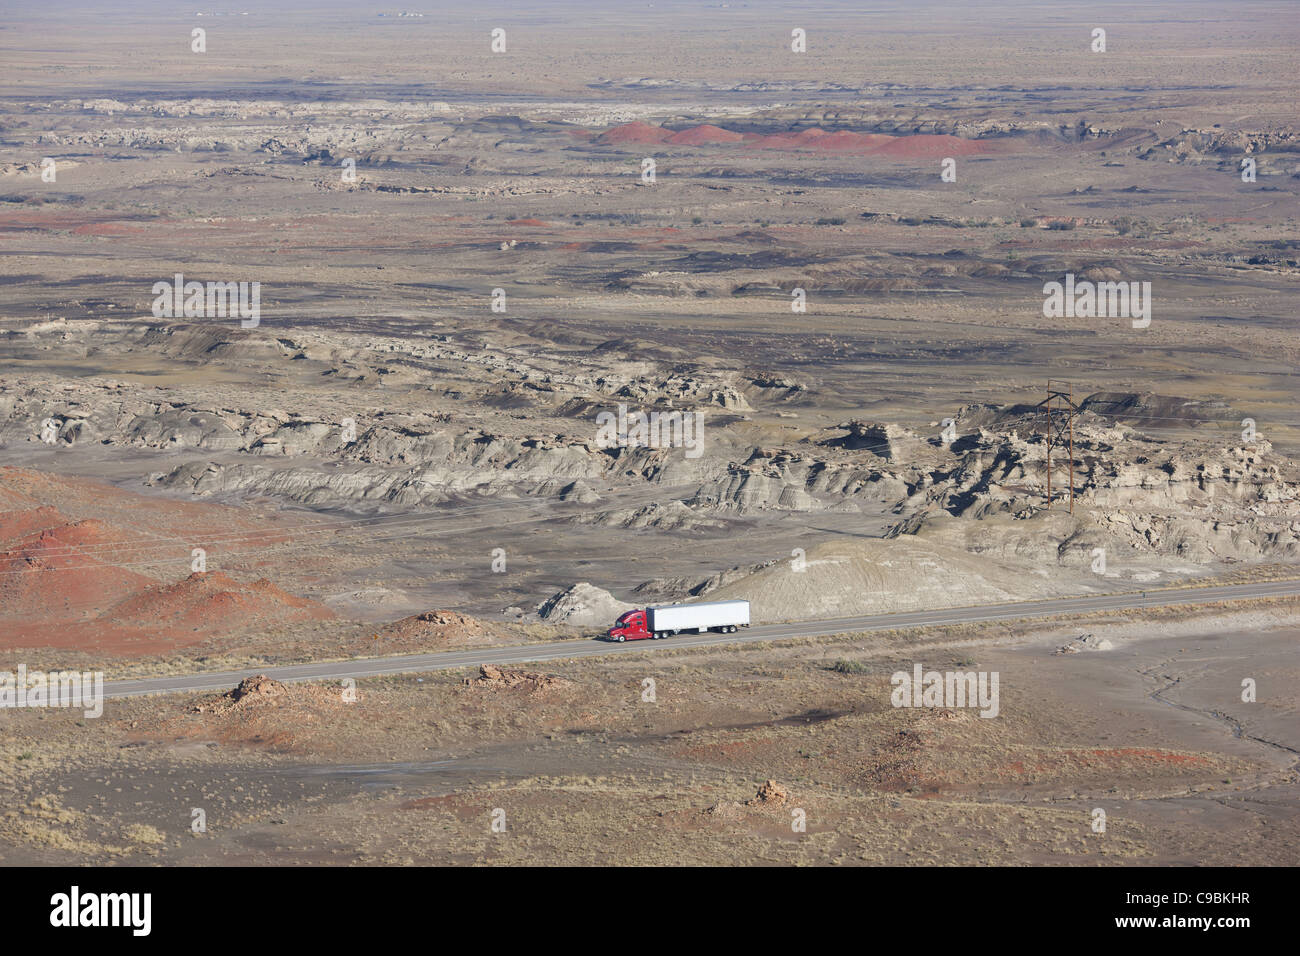 AERIAL VIEW. Moving truck in a desert landscape. Bisti De-Na-Zin Wilderness, San Juan County, New Mexico, USA. Stock Photo